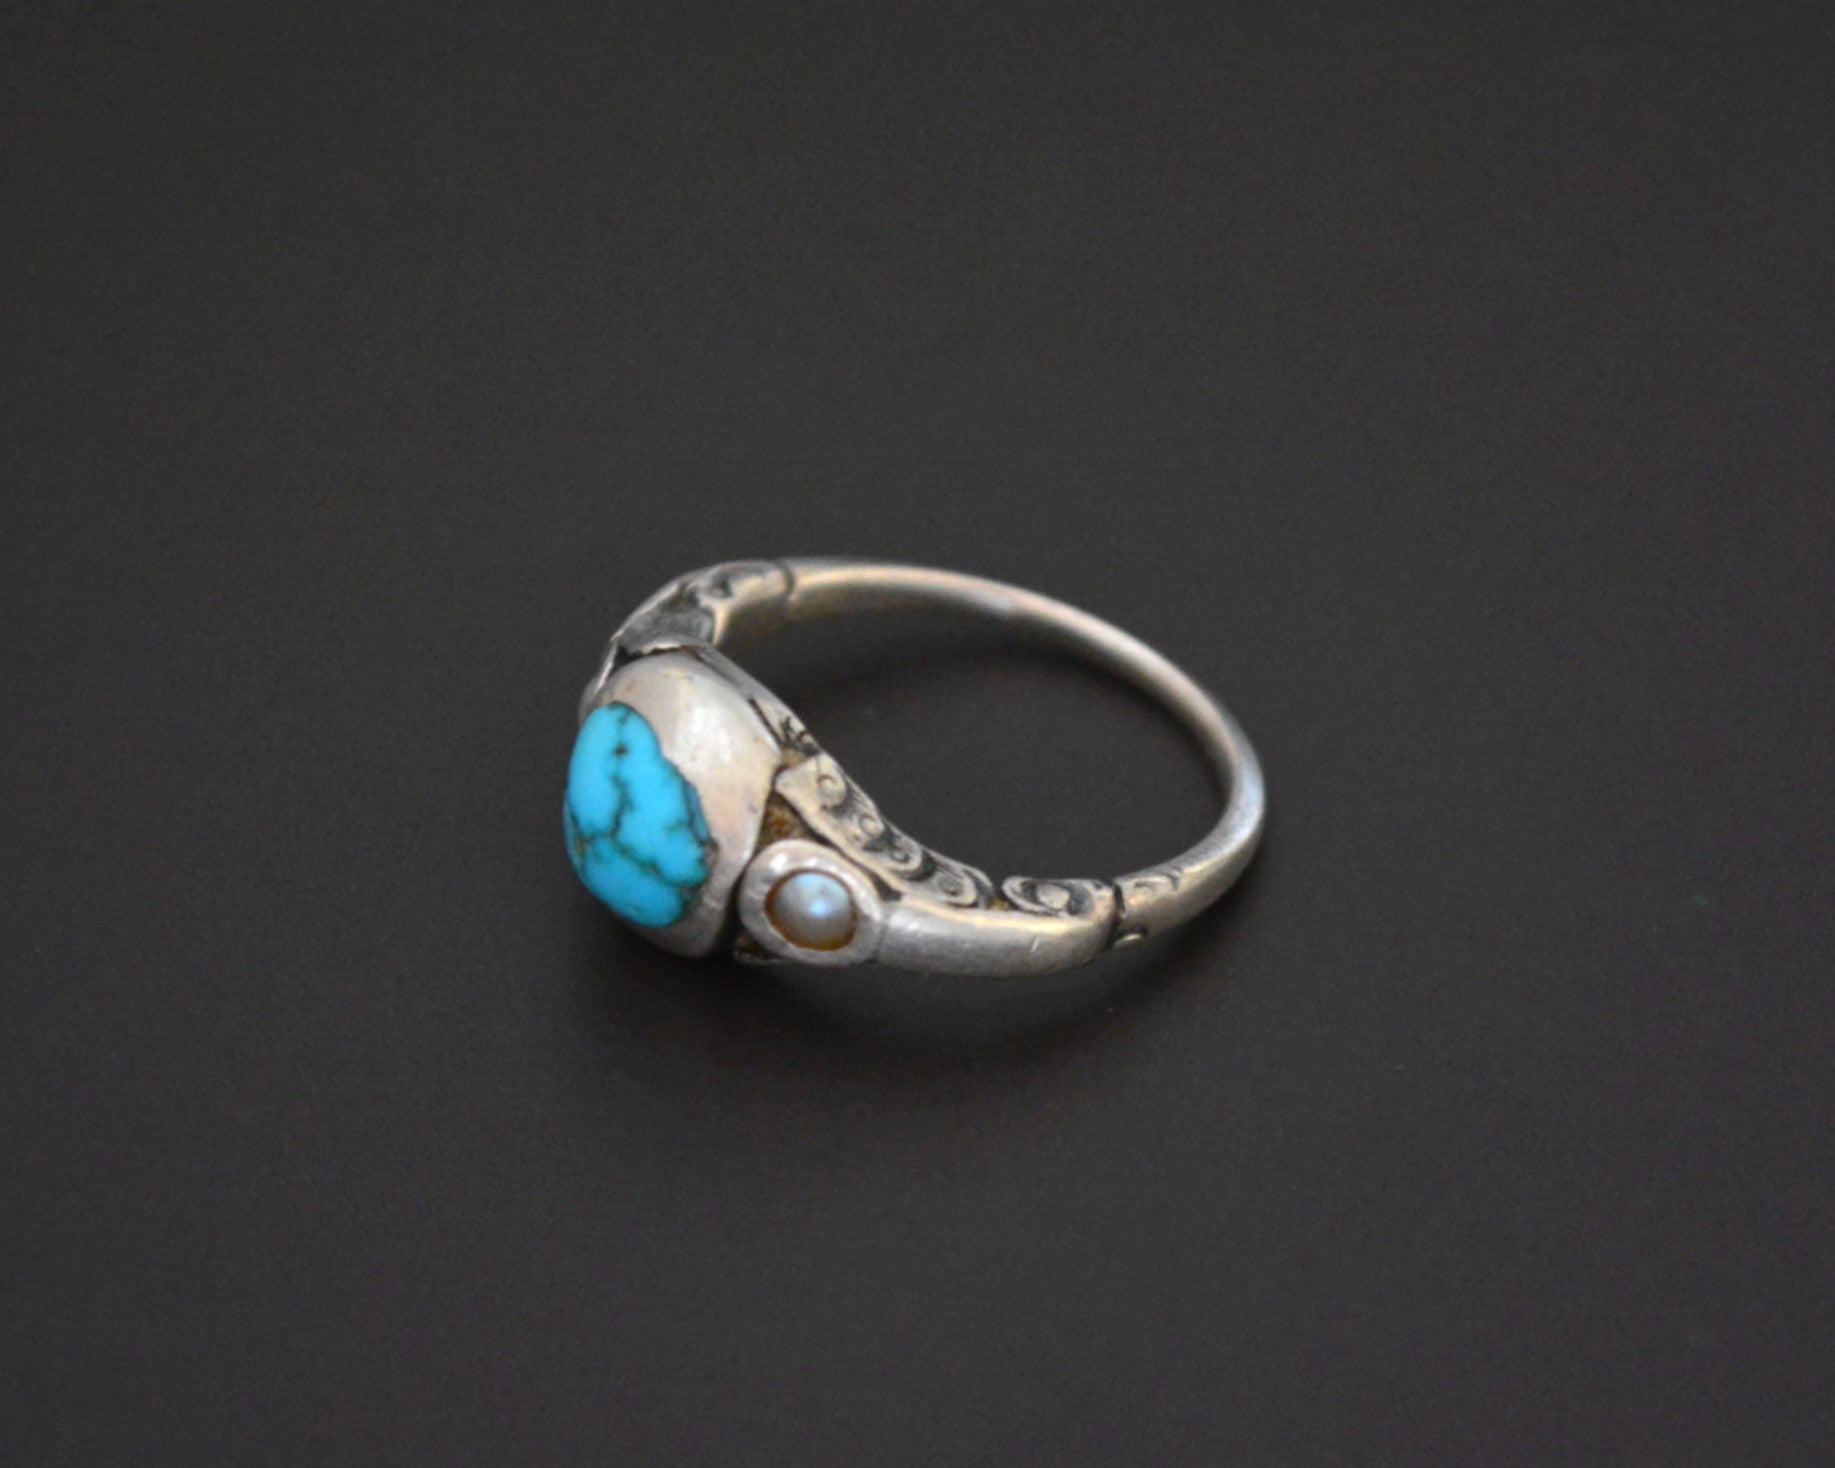 Old Tibetan Turquoise Pearl Ring - Size 7.5